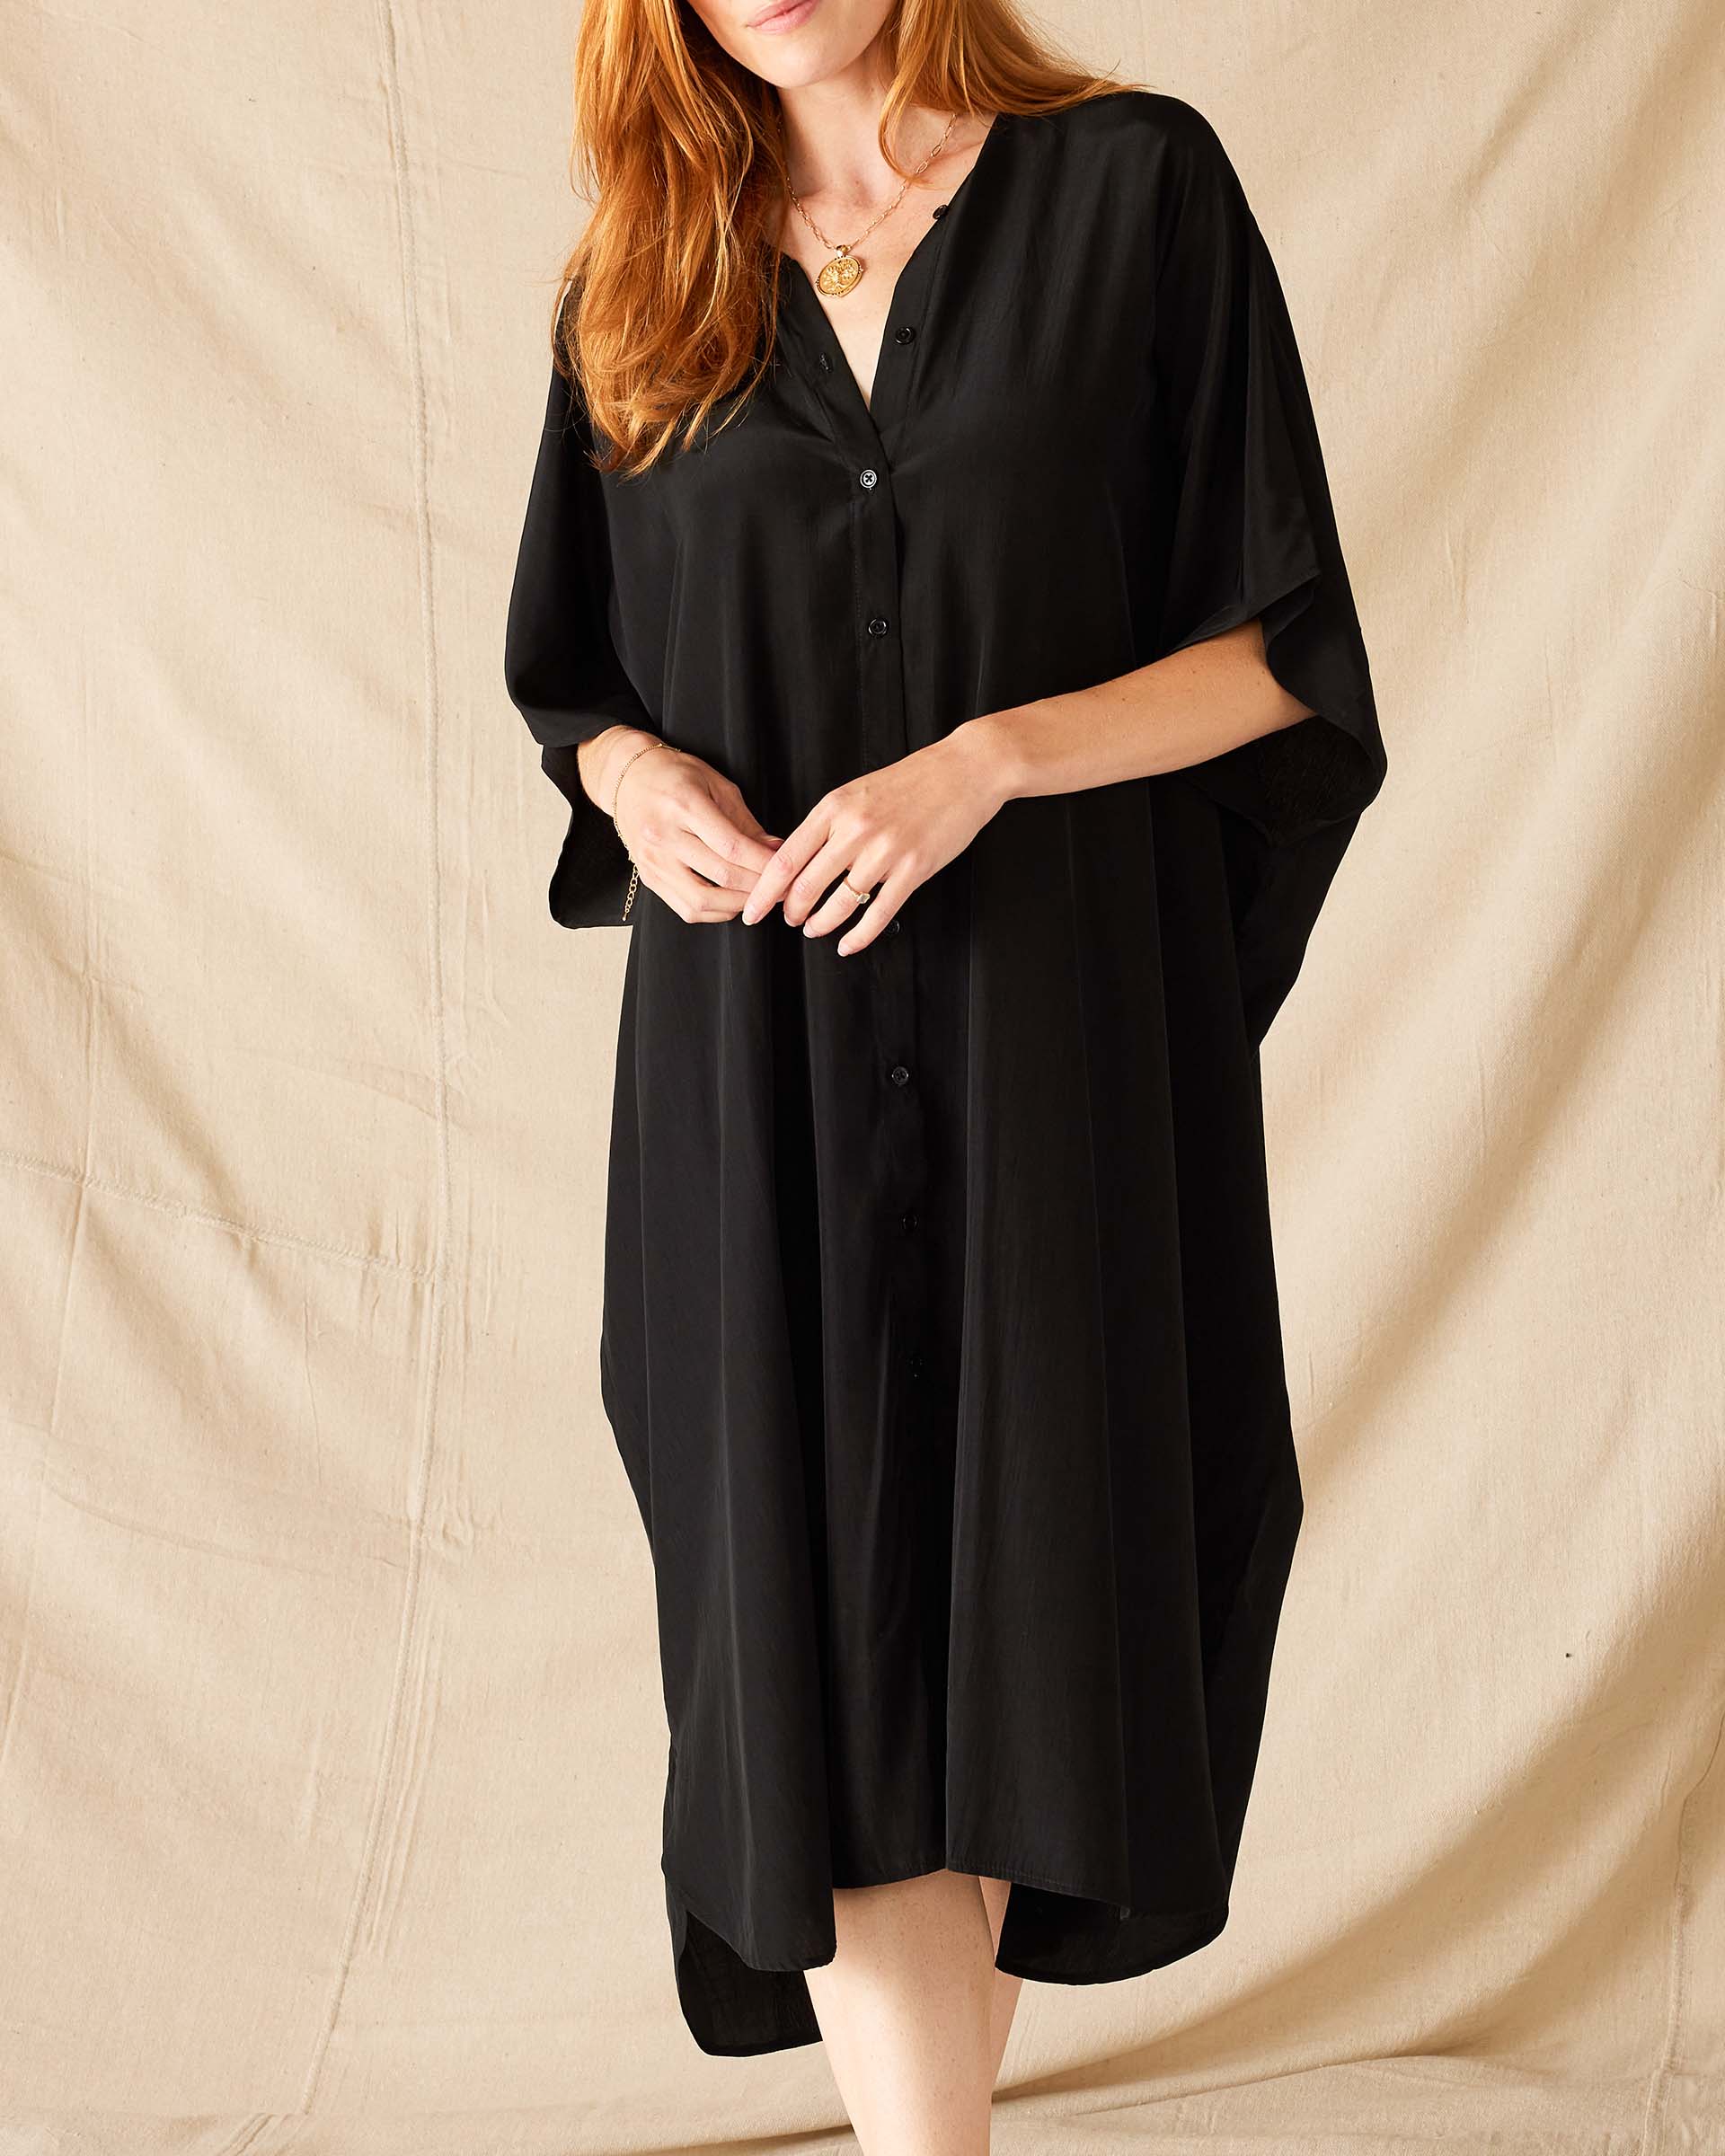 Women's Black Mallorca Kaftan Dress and Coverup With Button-up Front Sleeveless Drop Shoulder Front View